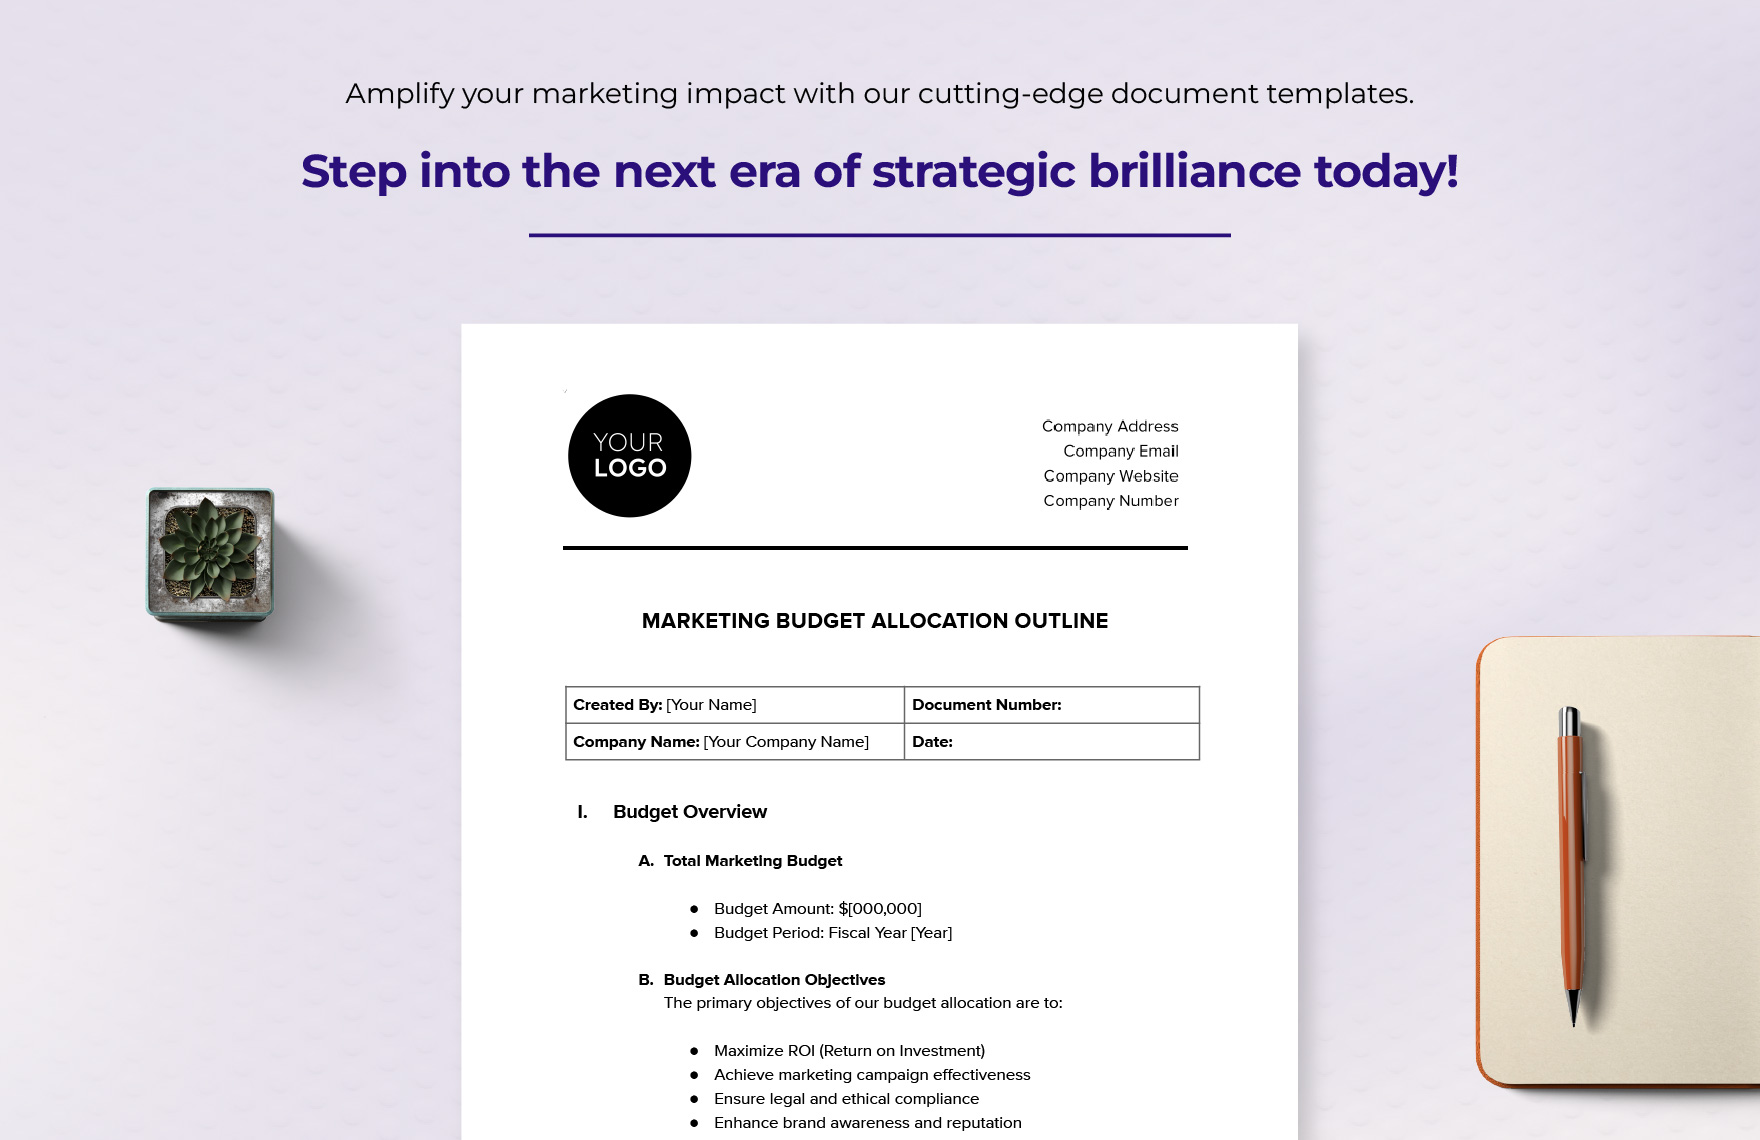 Marketing Budget Allocation Outline Template